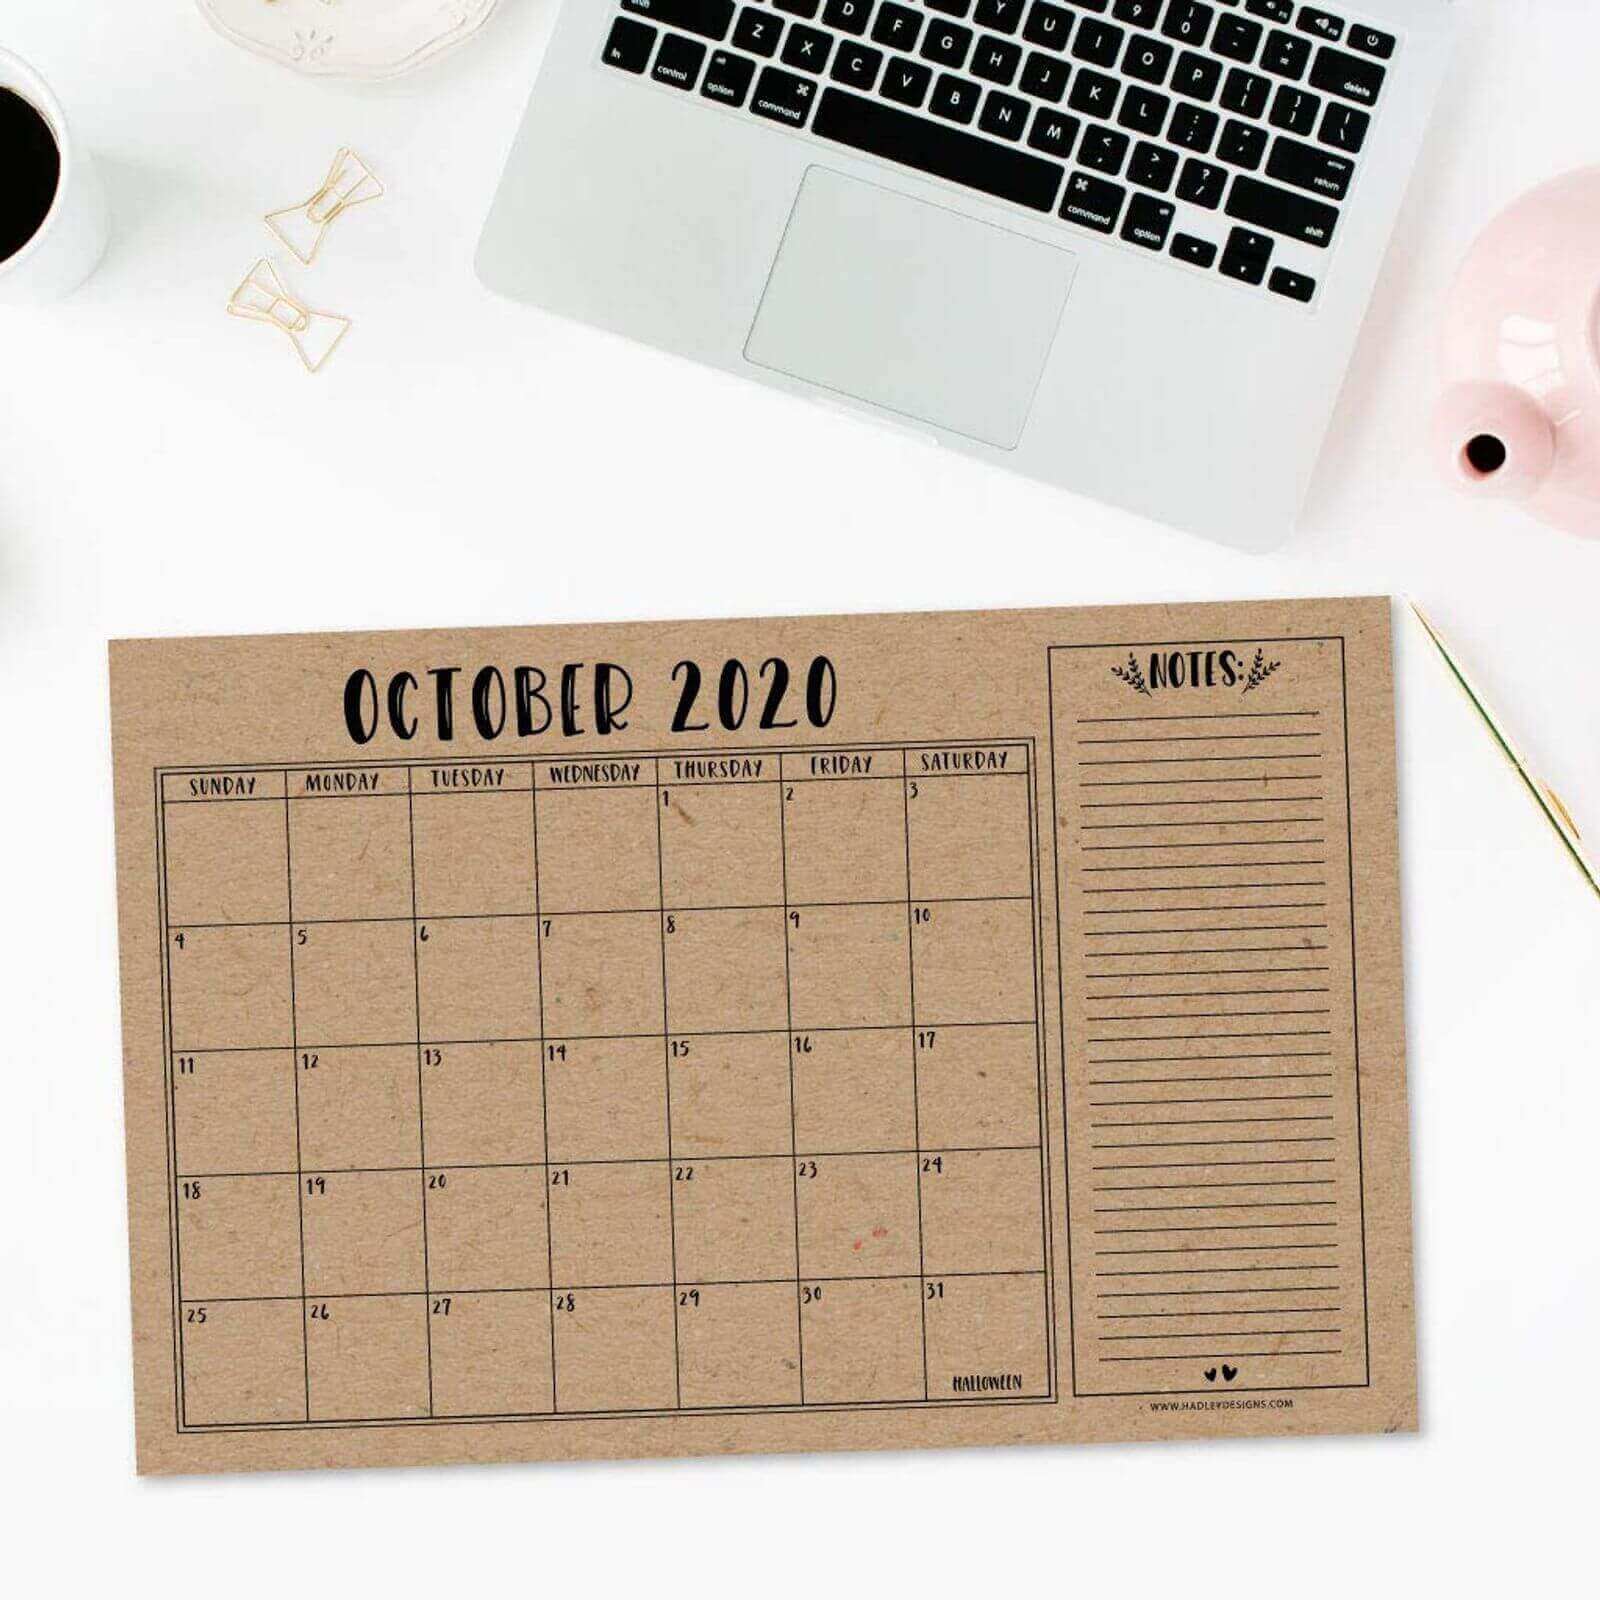 10 Cool Must Have Desk Accessories To Help Organize And Inspire